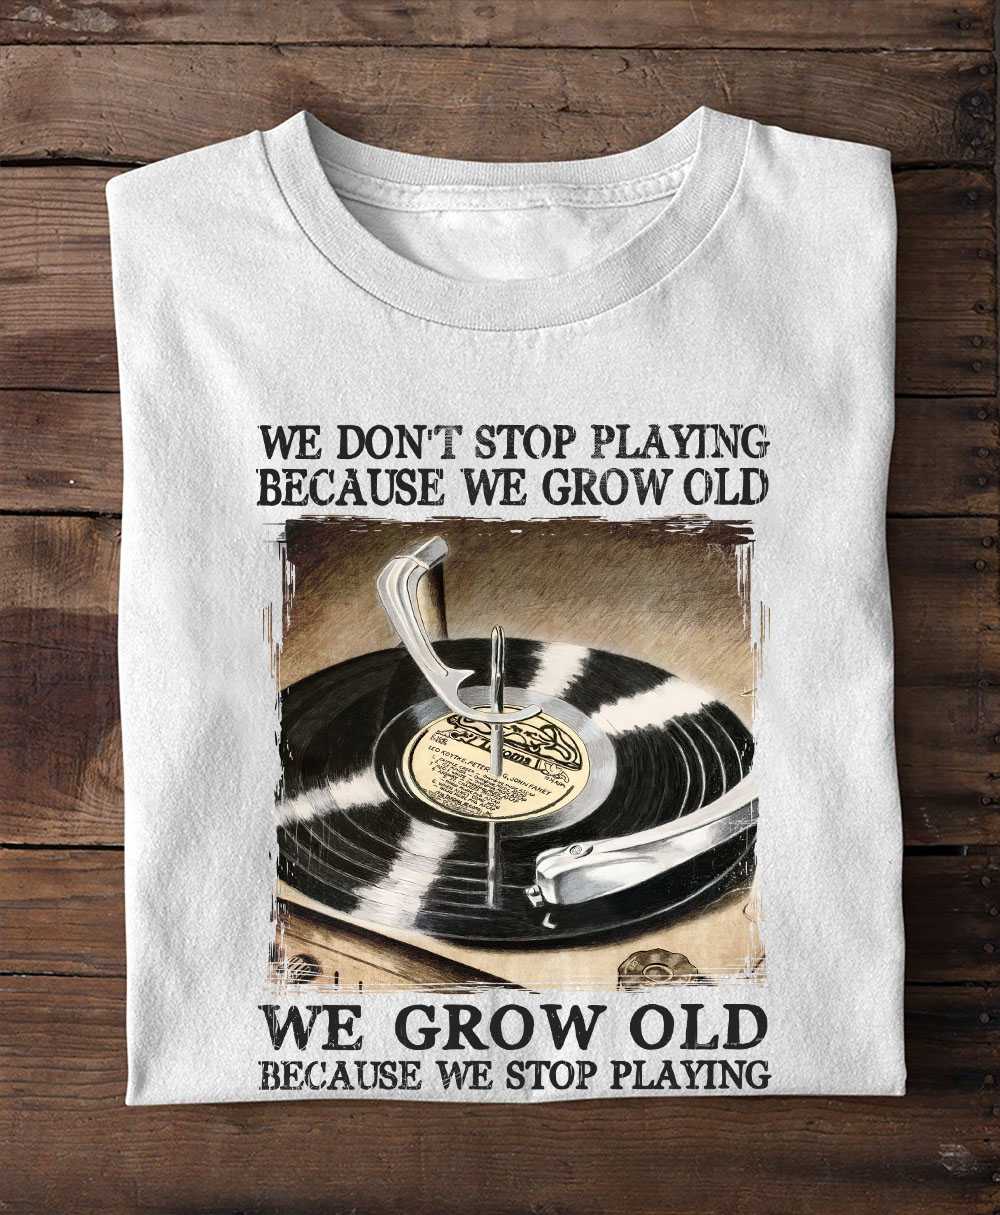 Vinyl Record - We don't stop playing because we grow old